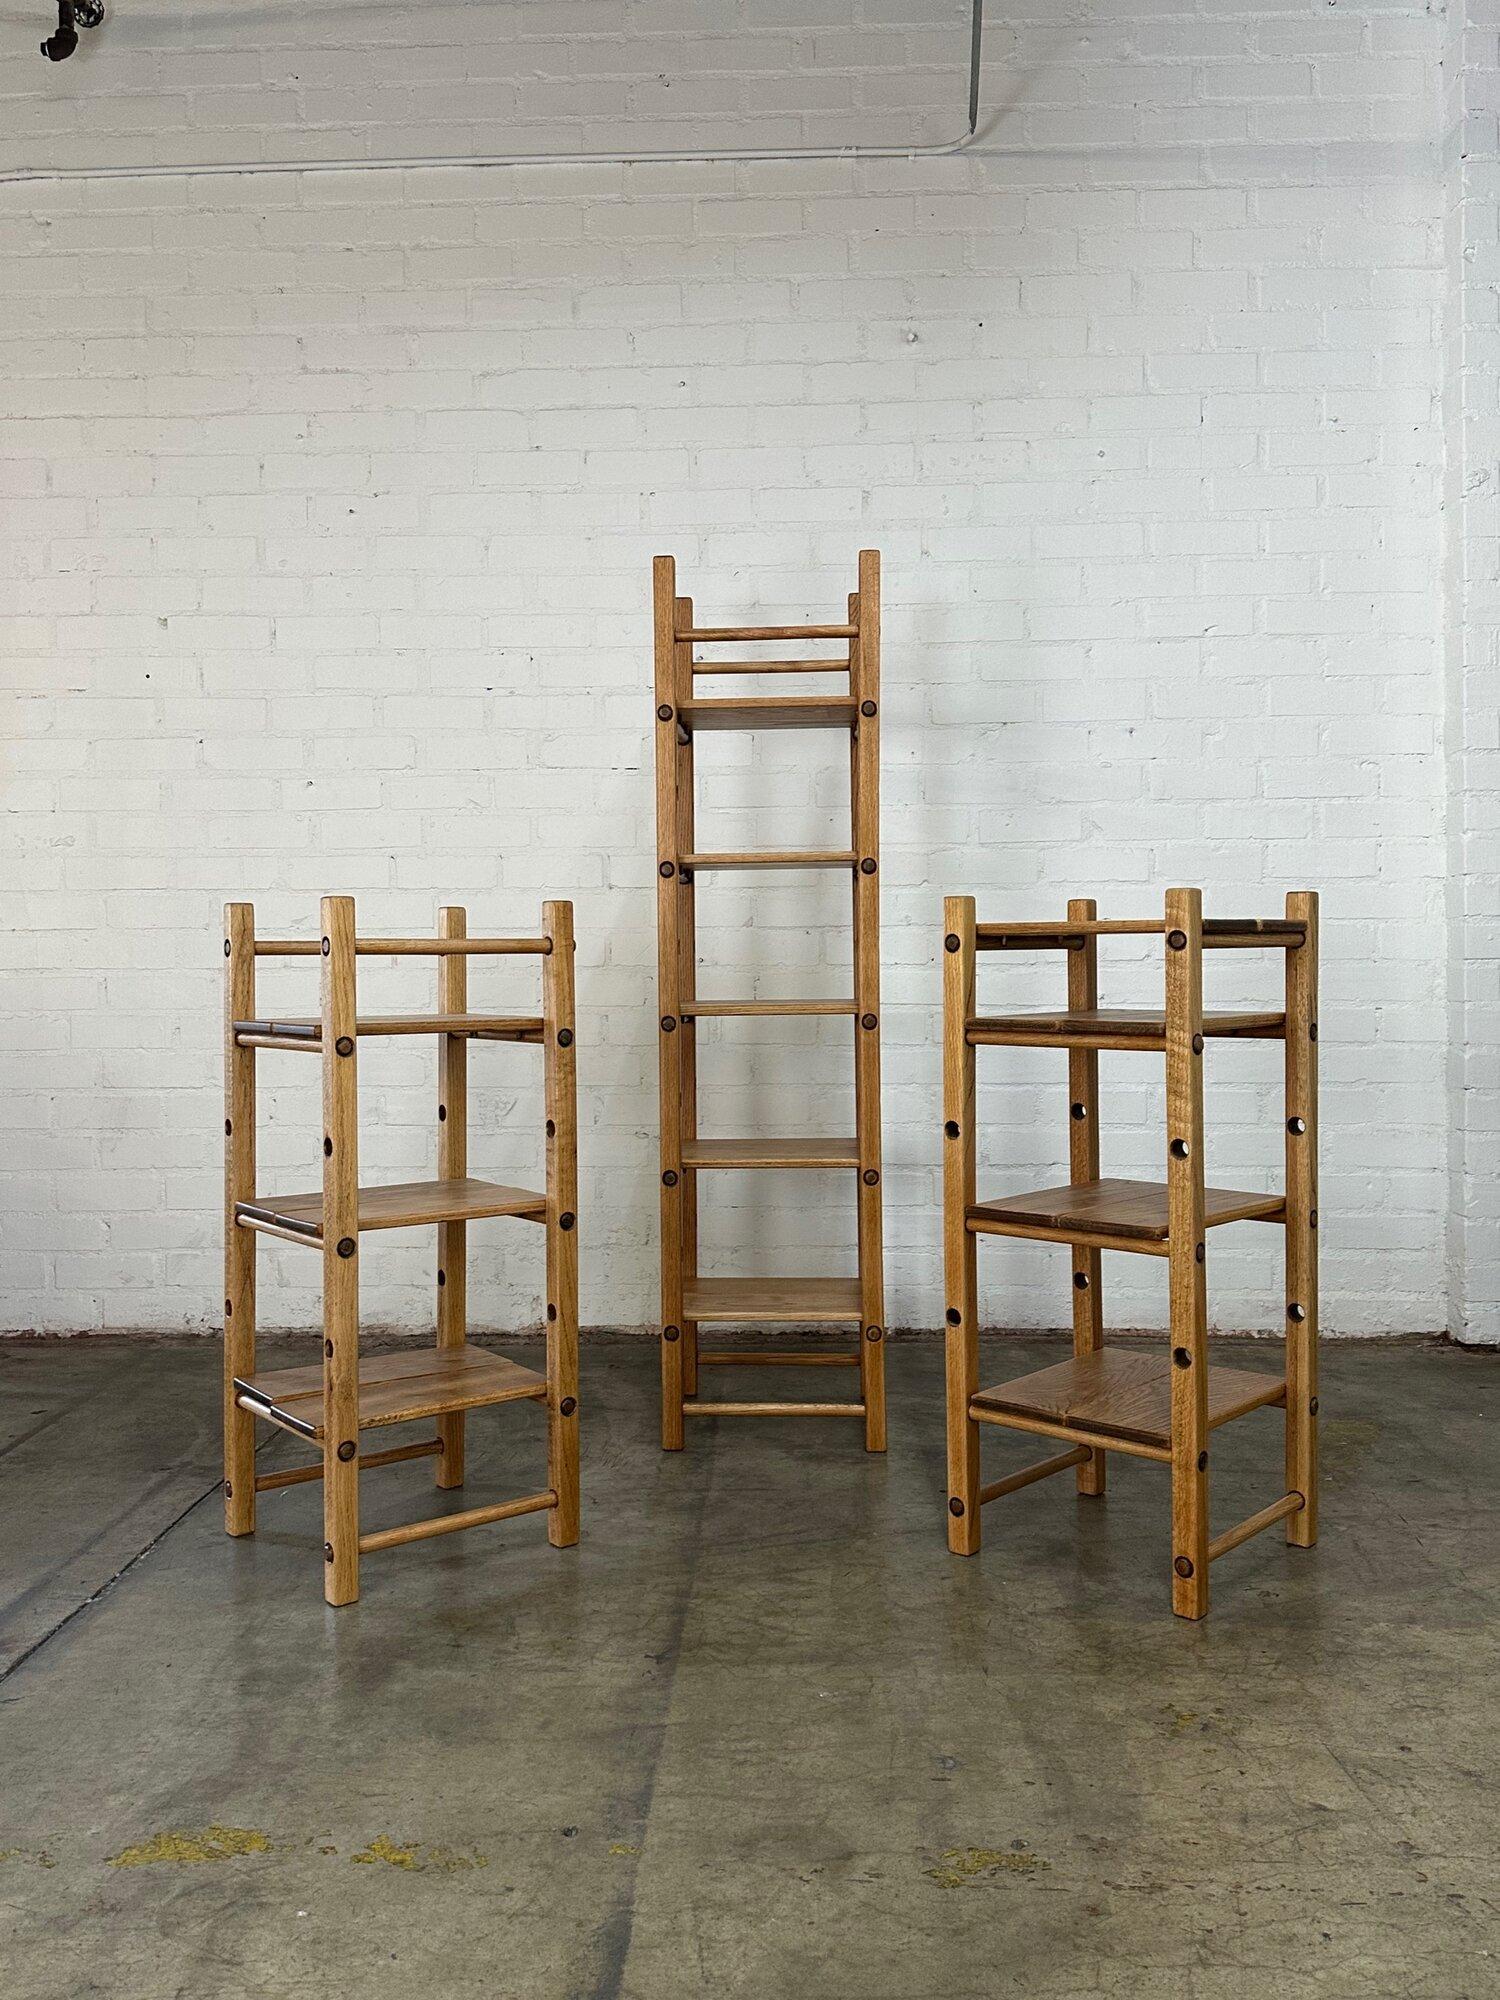 W17 D17 H42 BETWEEN SHELVES 11

Fully restored solid oak shelving unit. Shelving units consists of solid oak pieces that can be fully disassembled but come together tightly with dowel pressure. Shelving is fully removable. Listing is per matching